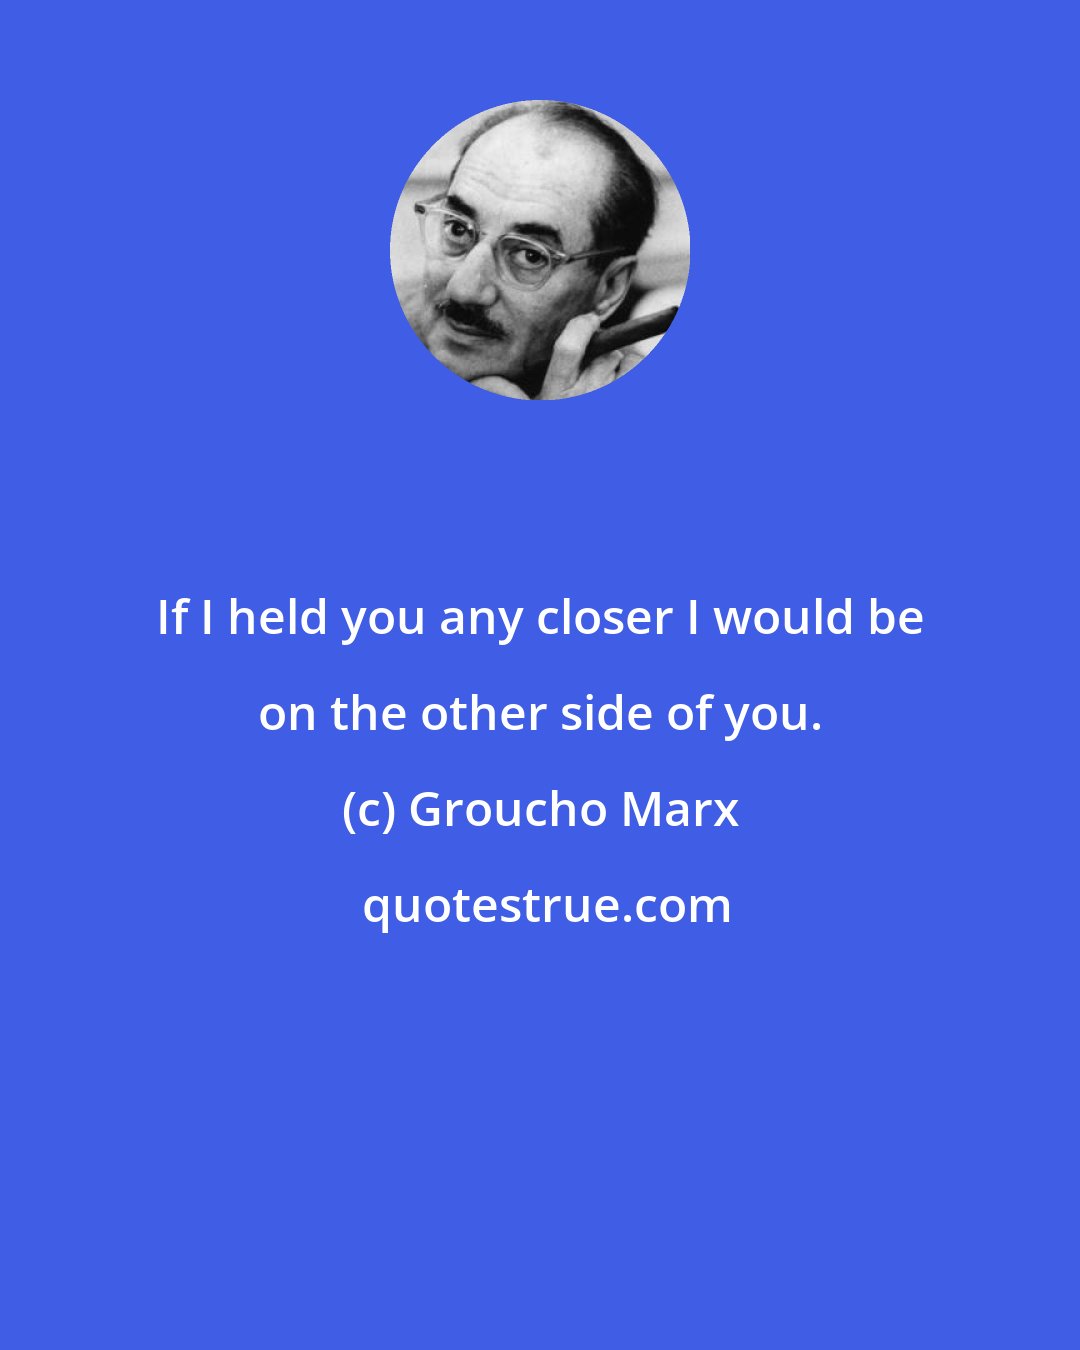 Groucho Marx: If I held you any closer I would be on the other side of you.